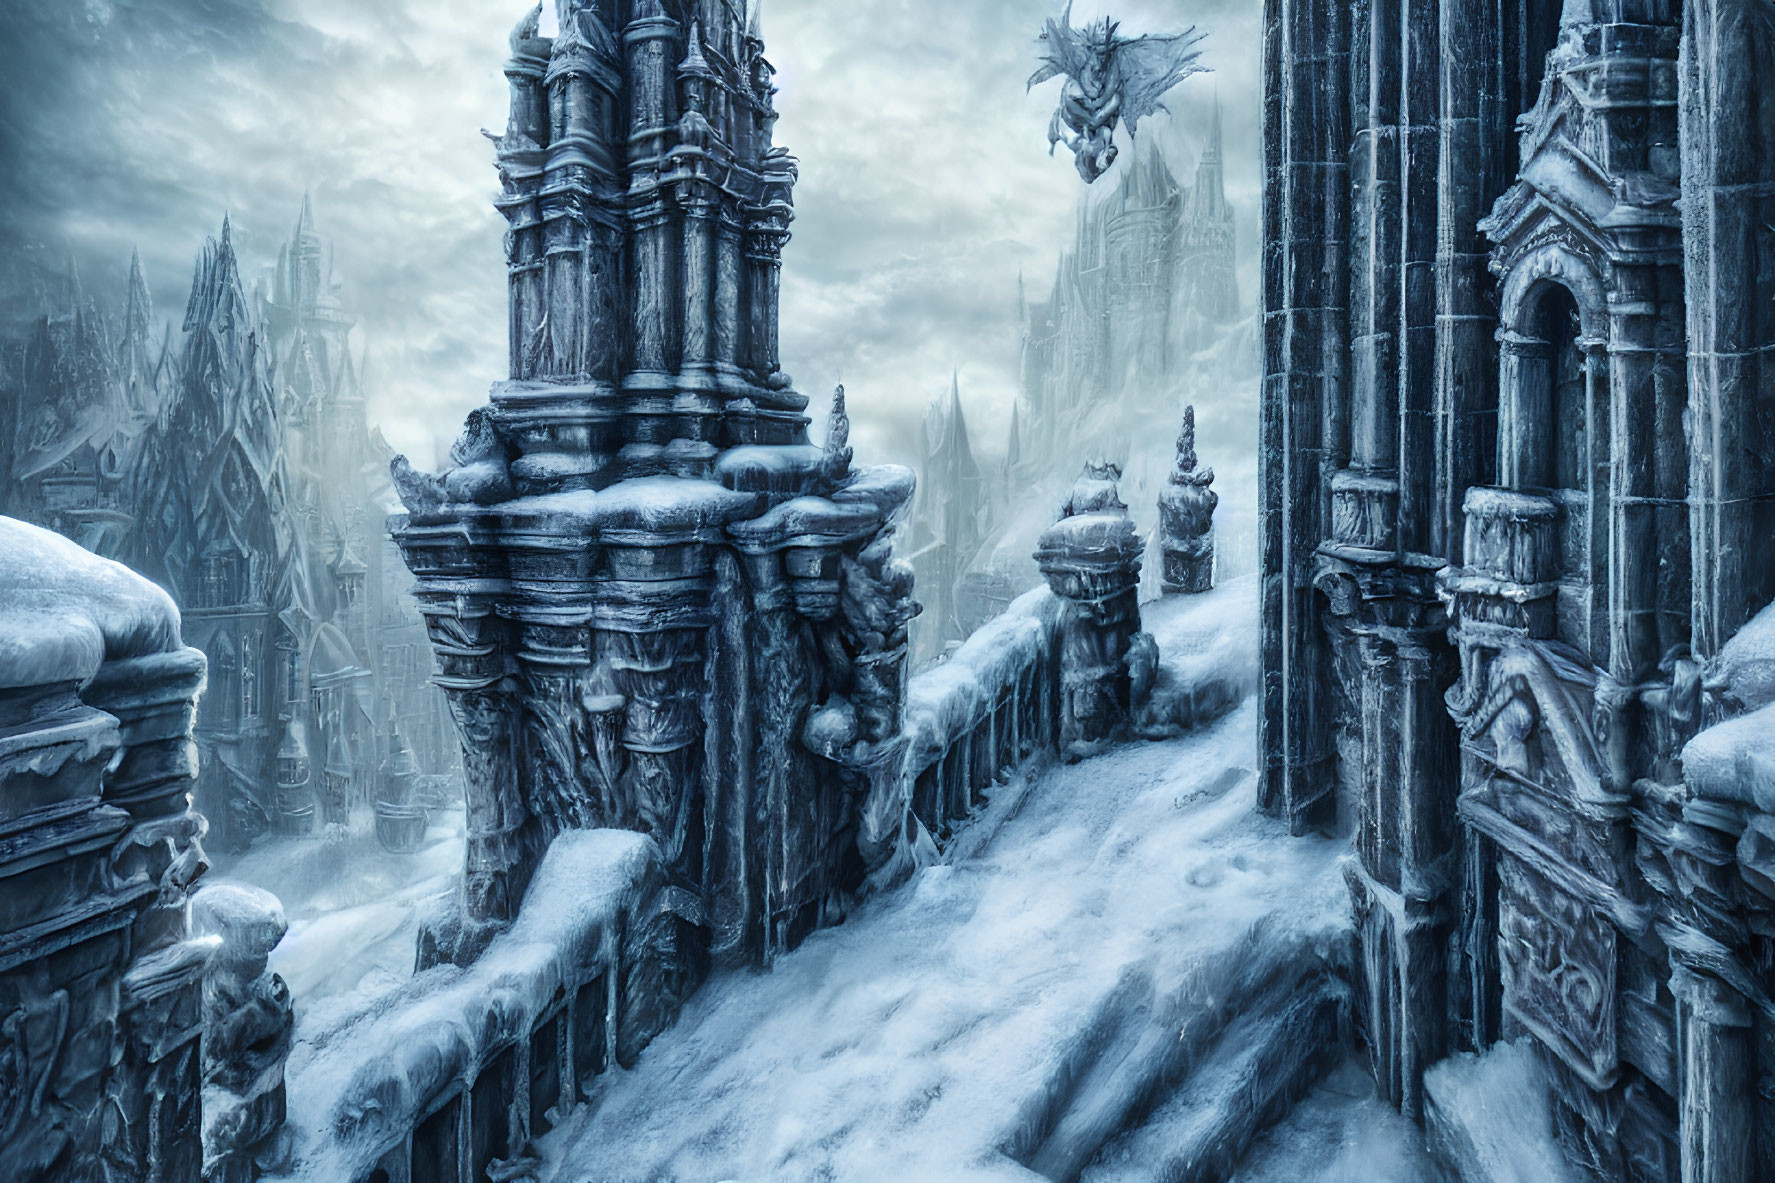 Snowy gothic architecture with dragon flying over frozen city